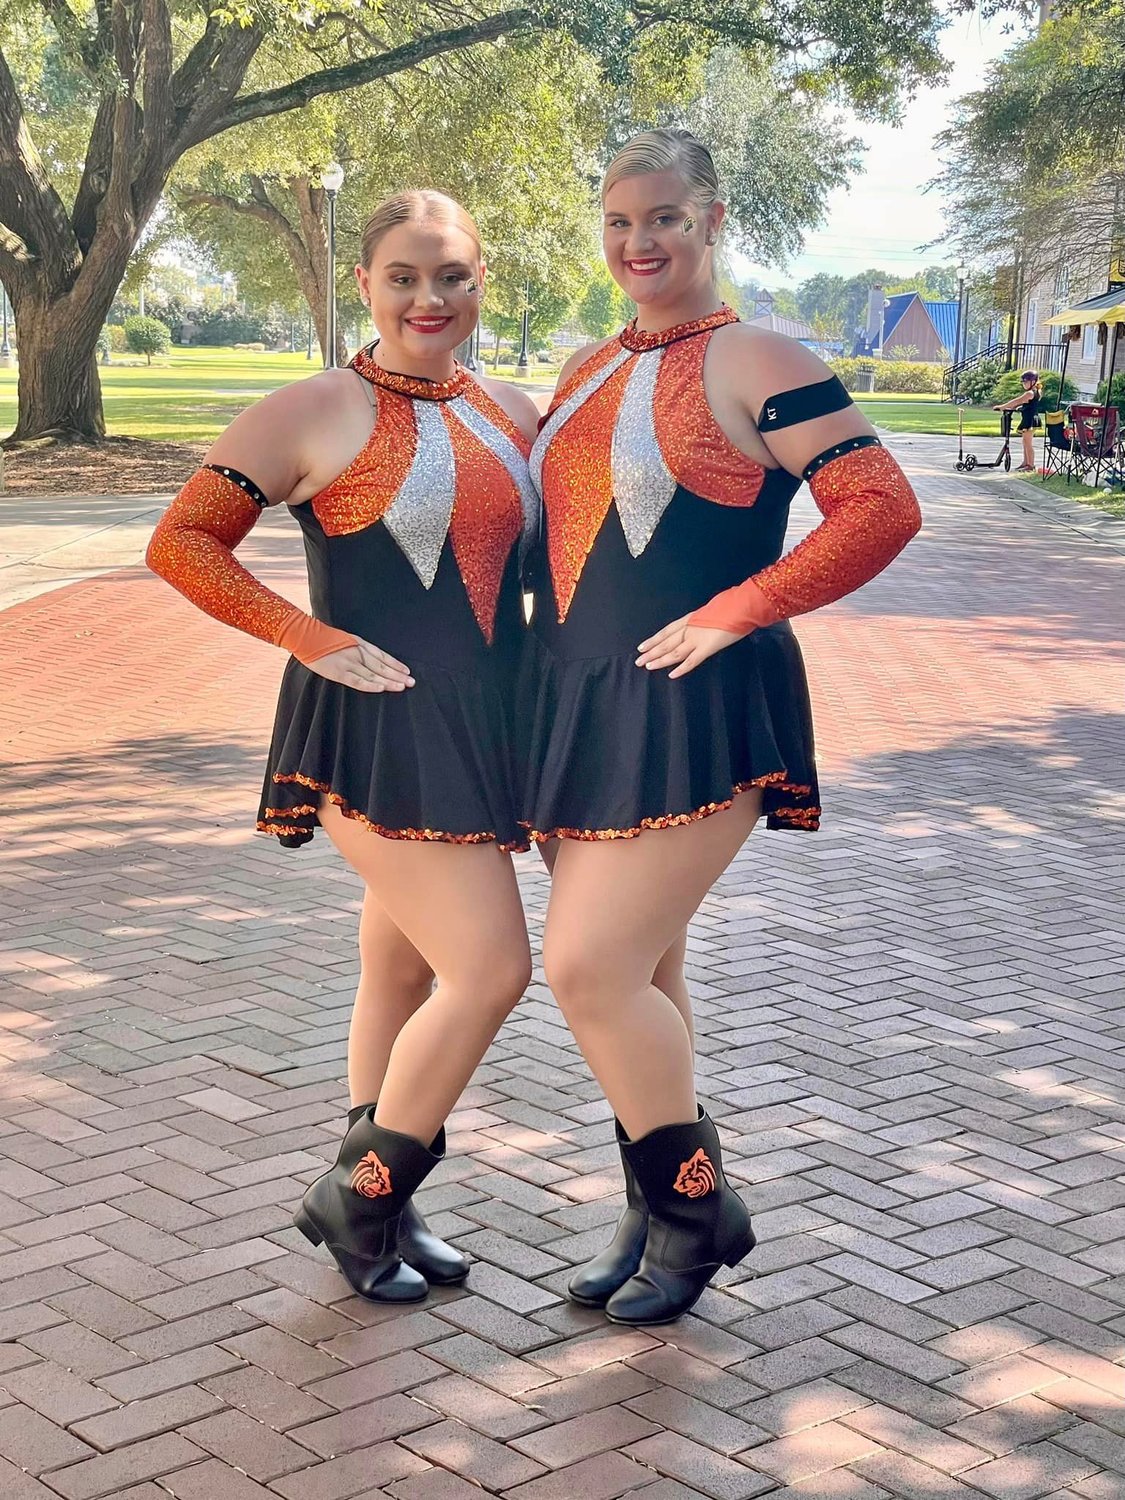 Senior members of the Baldwin County Tiger Guard, Autumn Hardy and Mallory Hastings, took part in the All-South Marching Band Day at the University of Southern Mississippi Saturday, Sept. 17. The pair practiced and performed with The Pride Guard representing Baldwin County High School.